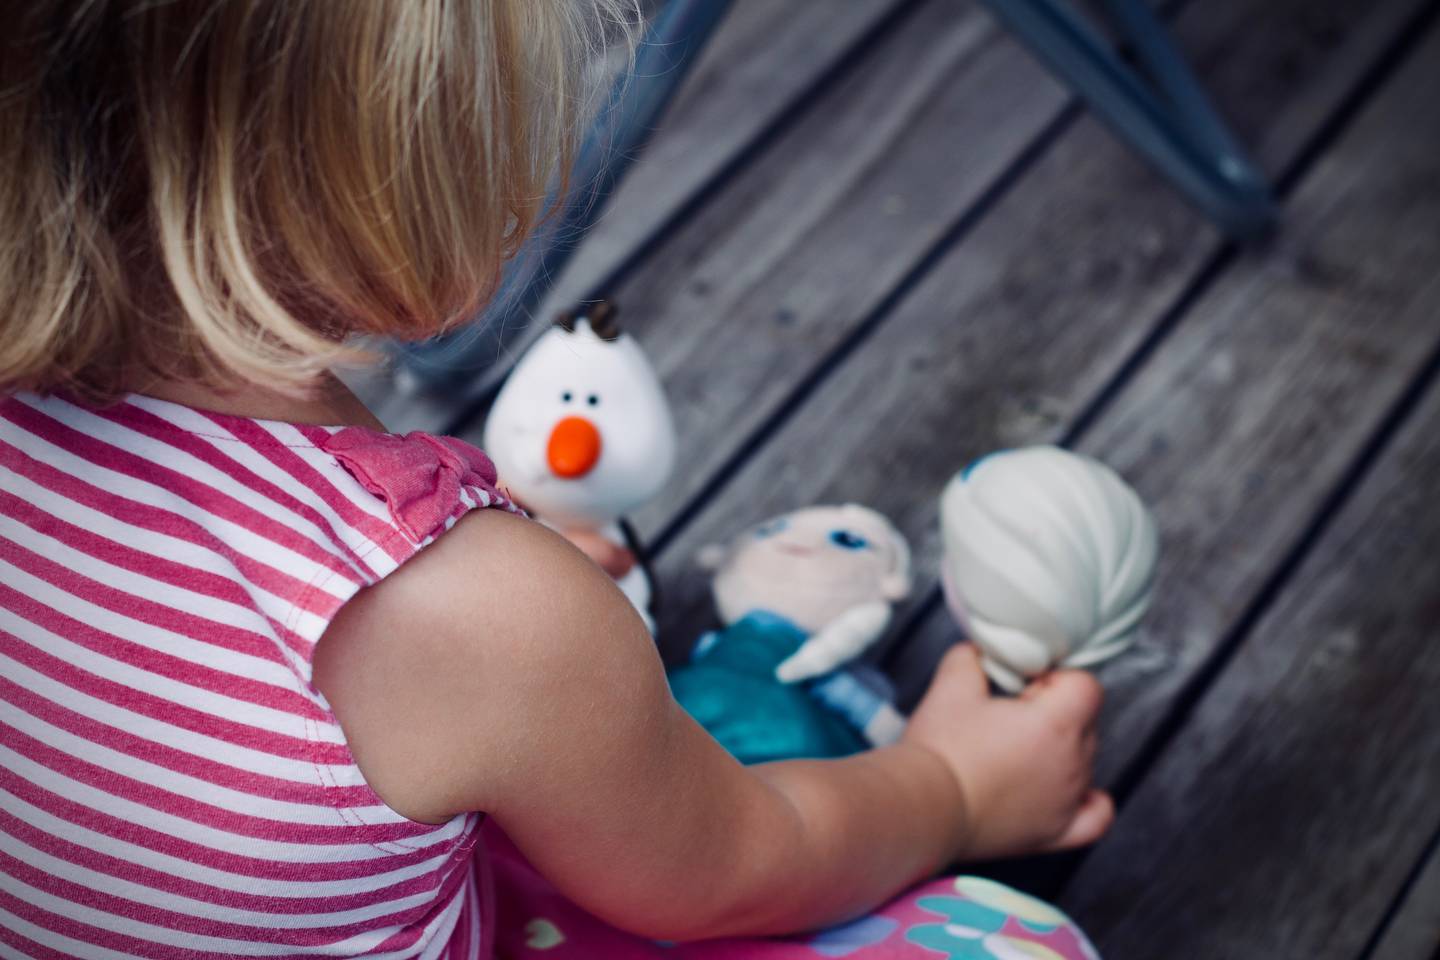 A wide variety of toys can help your child develop their creativity, as well as their cognitive abilities. Jelleke Vanooteghem / Unsplash